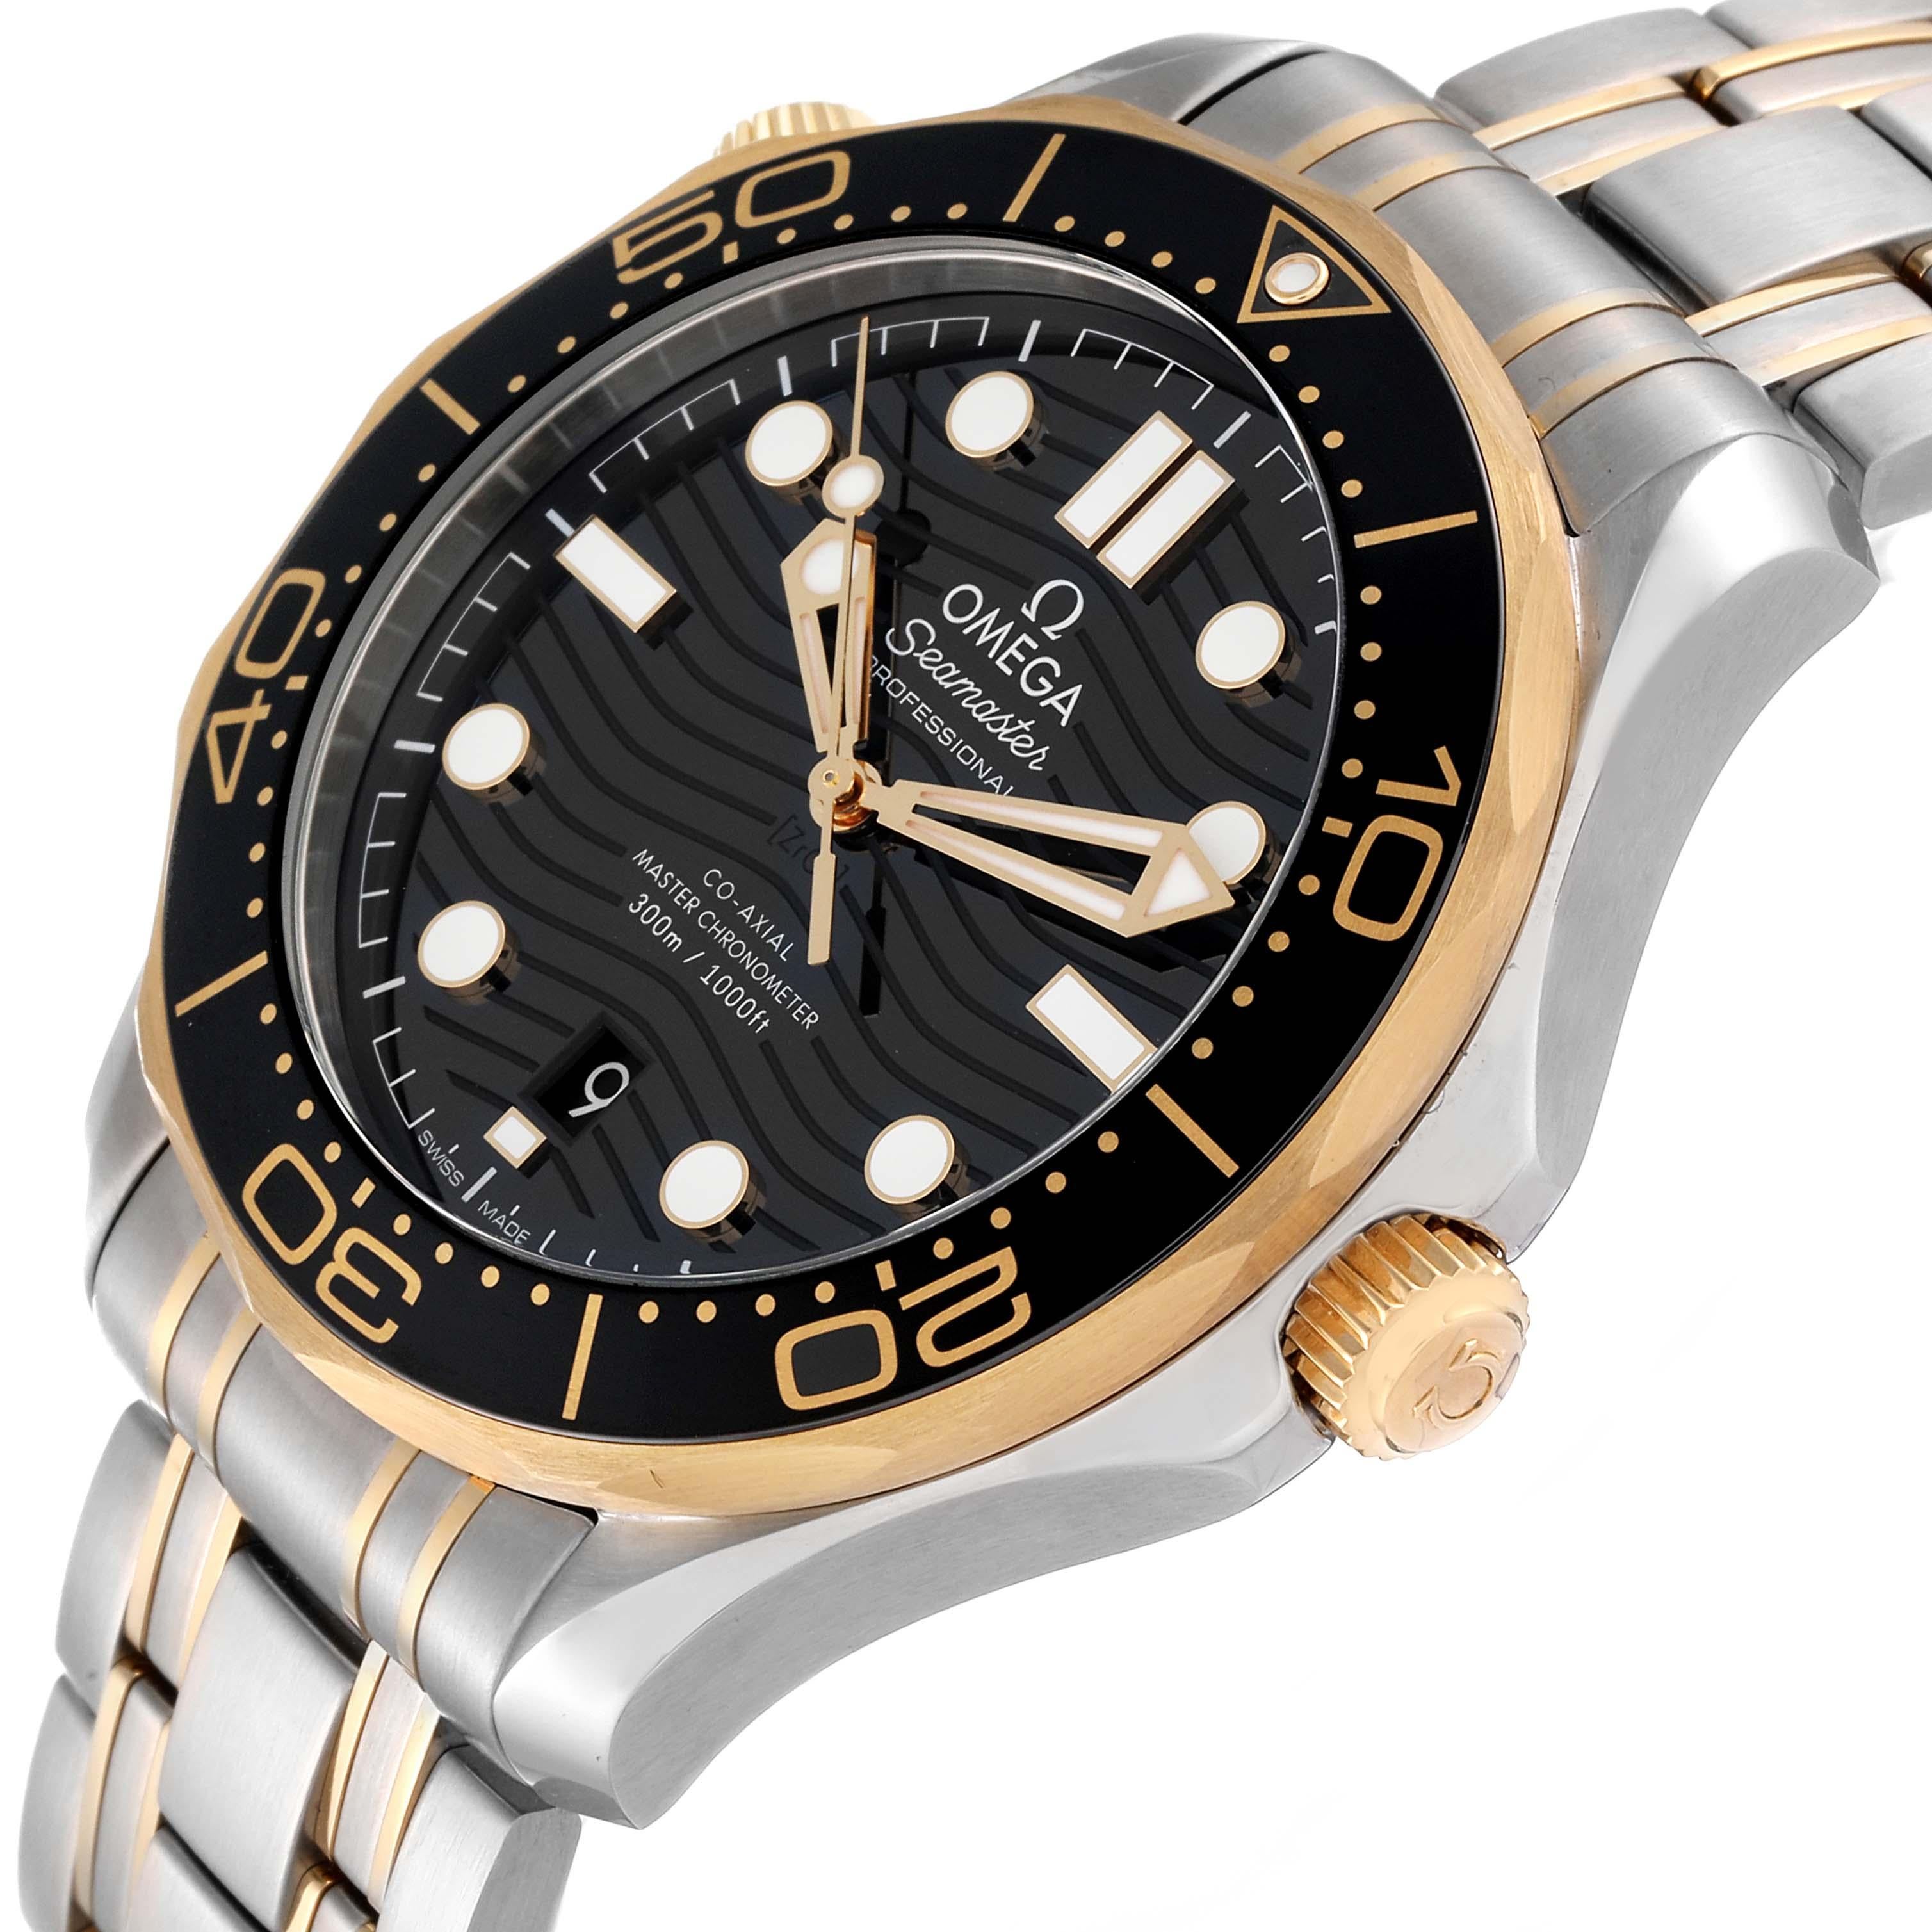 Omega Seamaster Steel Yellow Gold Mens Watch 210.20.42.20.01.002 Unworn For Sale 1